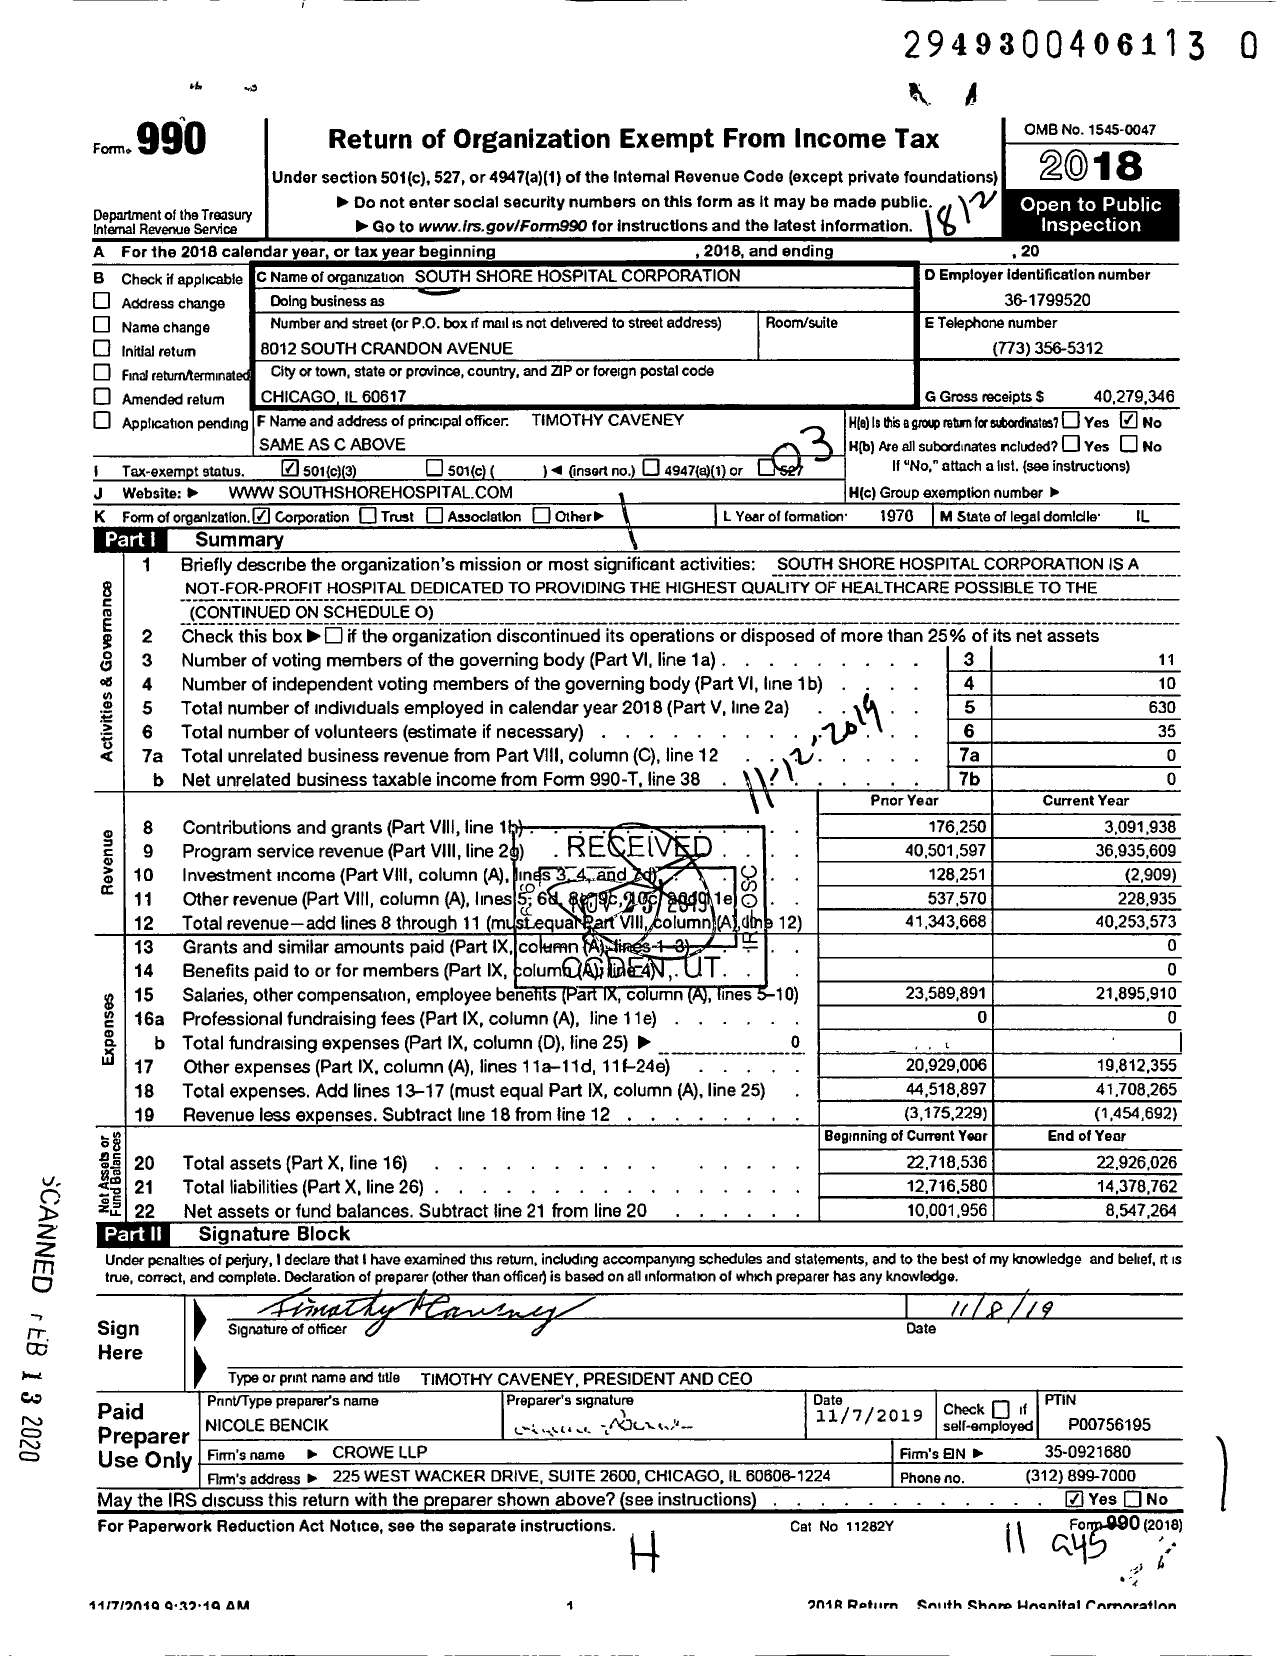 Image of first page of 2018 Form 990 for South Shore Hospital Corporation